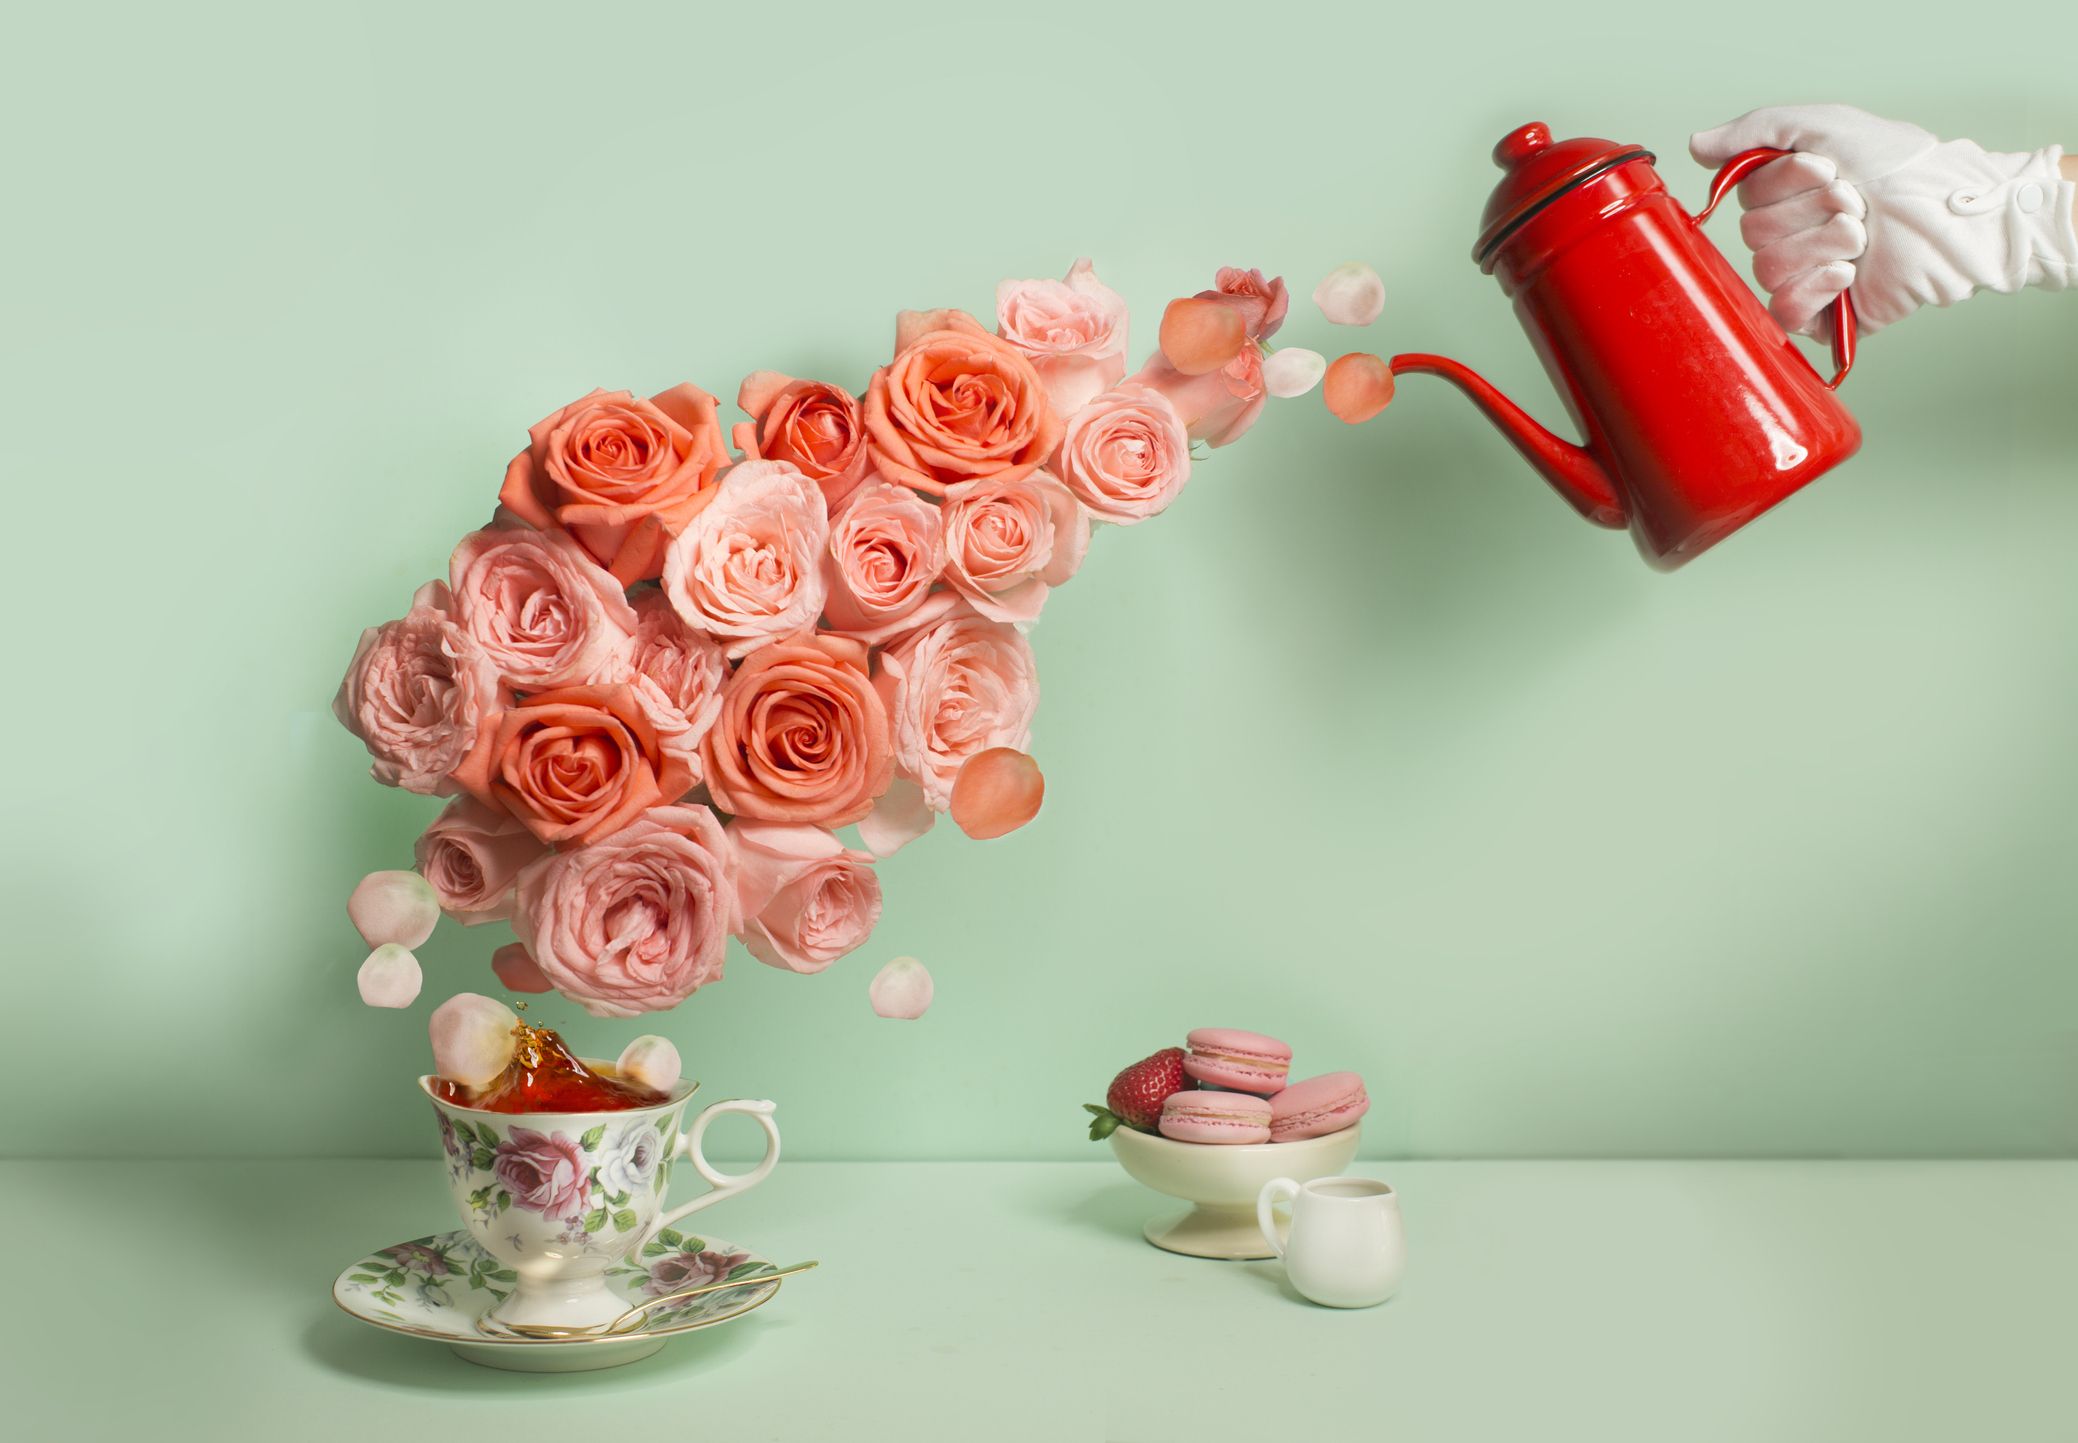 https://hips.hearstapps.com/hmg-prod/images/buttler-pouring-a-stream-of-roses-into-tea-cup-royalty-free-image-1659379799.jpg